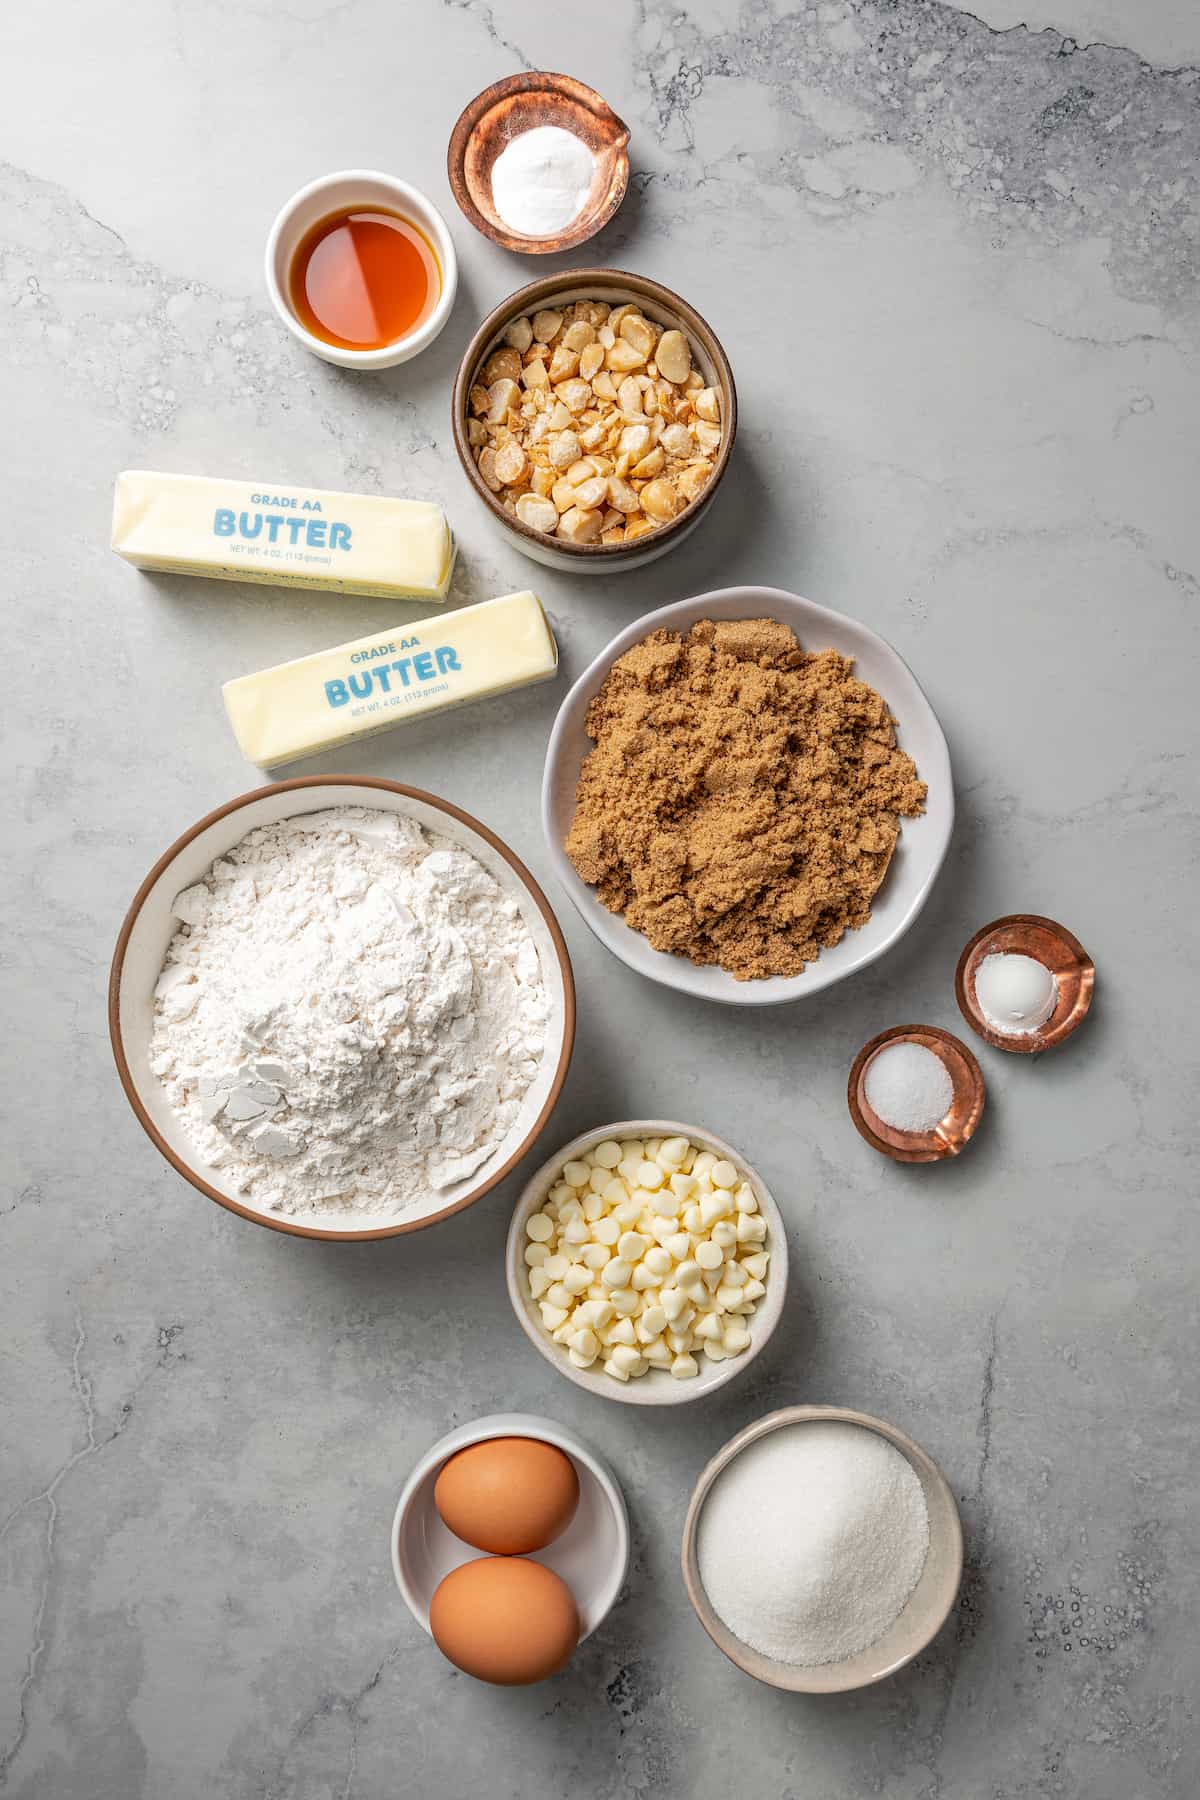 Overhead view of the ingredients needed for white chocolate chip cookies: a bowl of flour, a bowl of white chocolate chips, a bowl of macadamia nuts, a bowl of sugar, a bowl of brown sugar, a bowl of eggs, a bowl of salt, a bowl of baking soda, a bowl of baking powder, a bowl of vanilla extract, and two sticks of butter